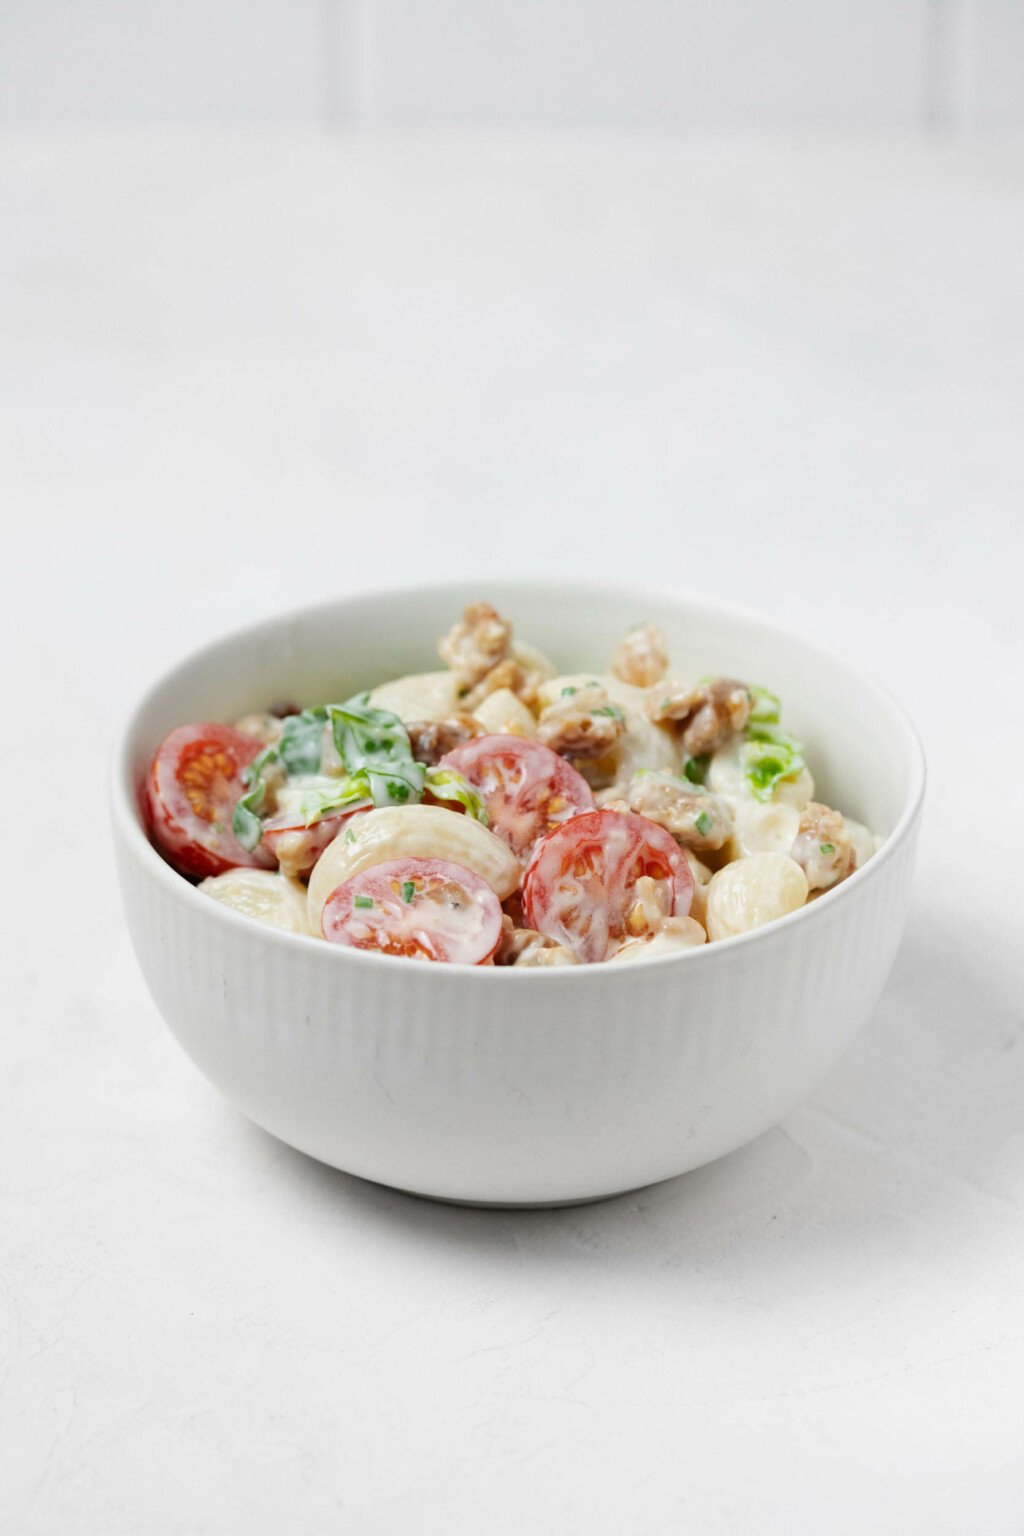 A round, white bowl is filled with a vegan BLT-inspired, creamy pasta salad. It rests on a white surface.